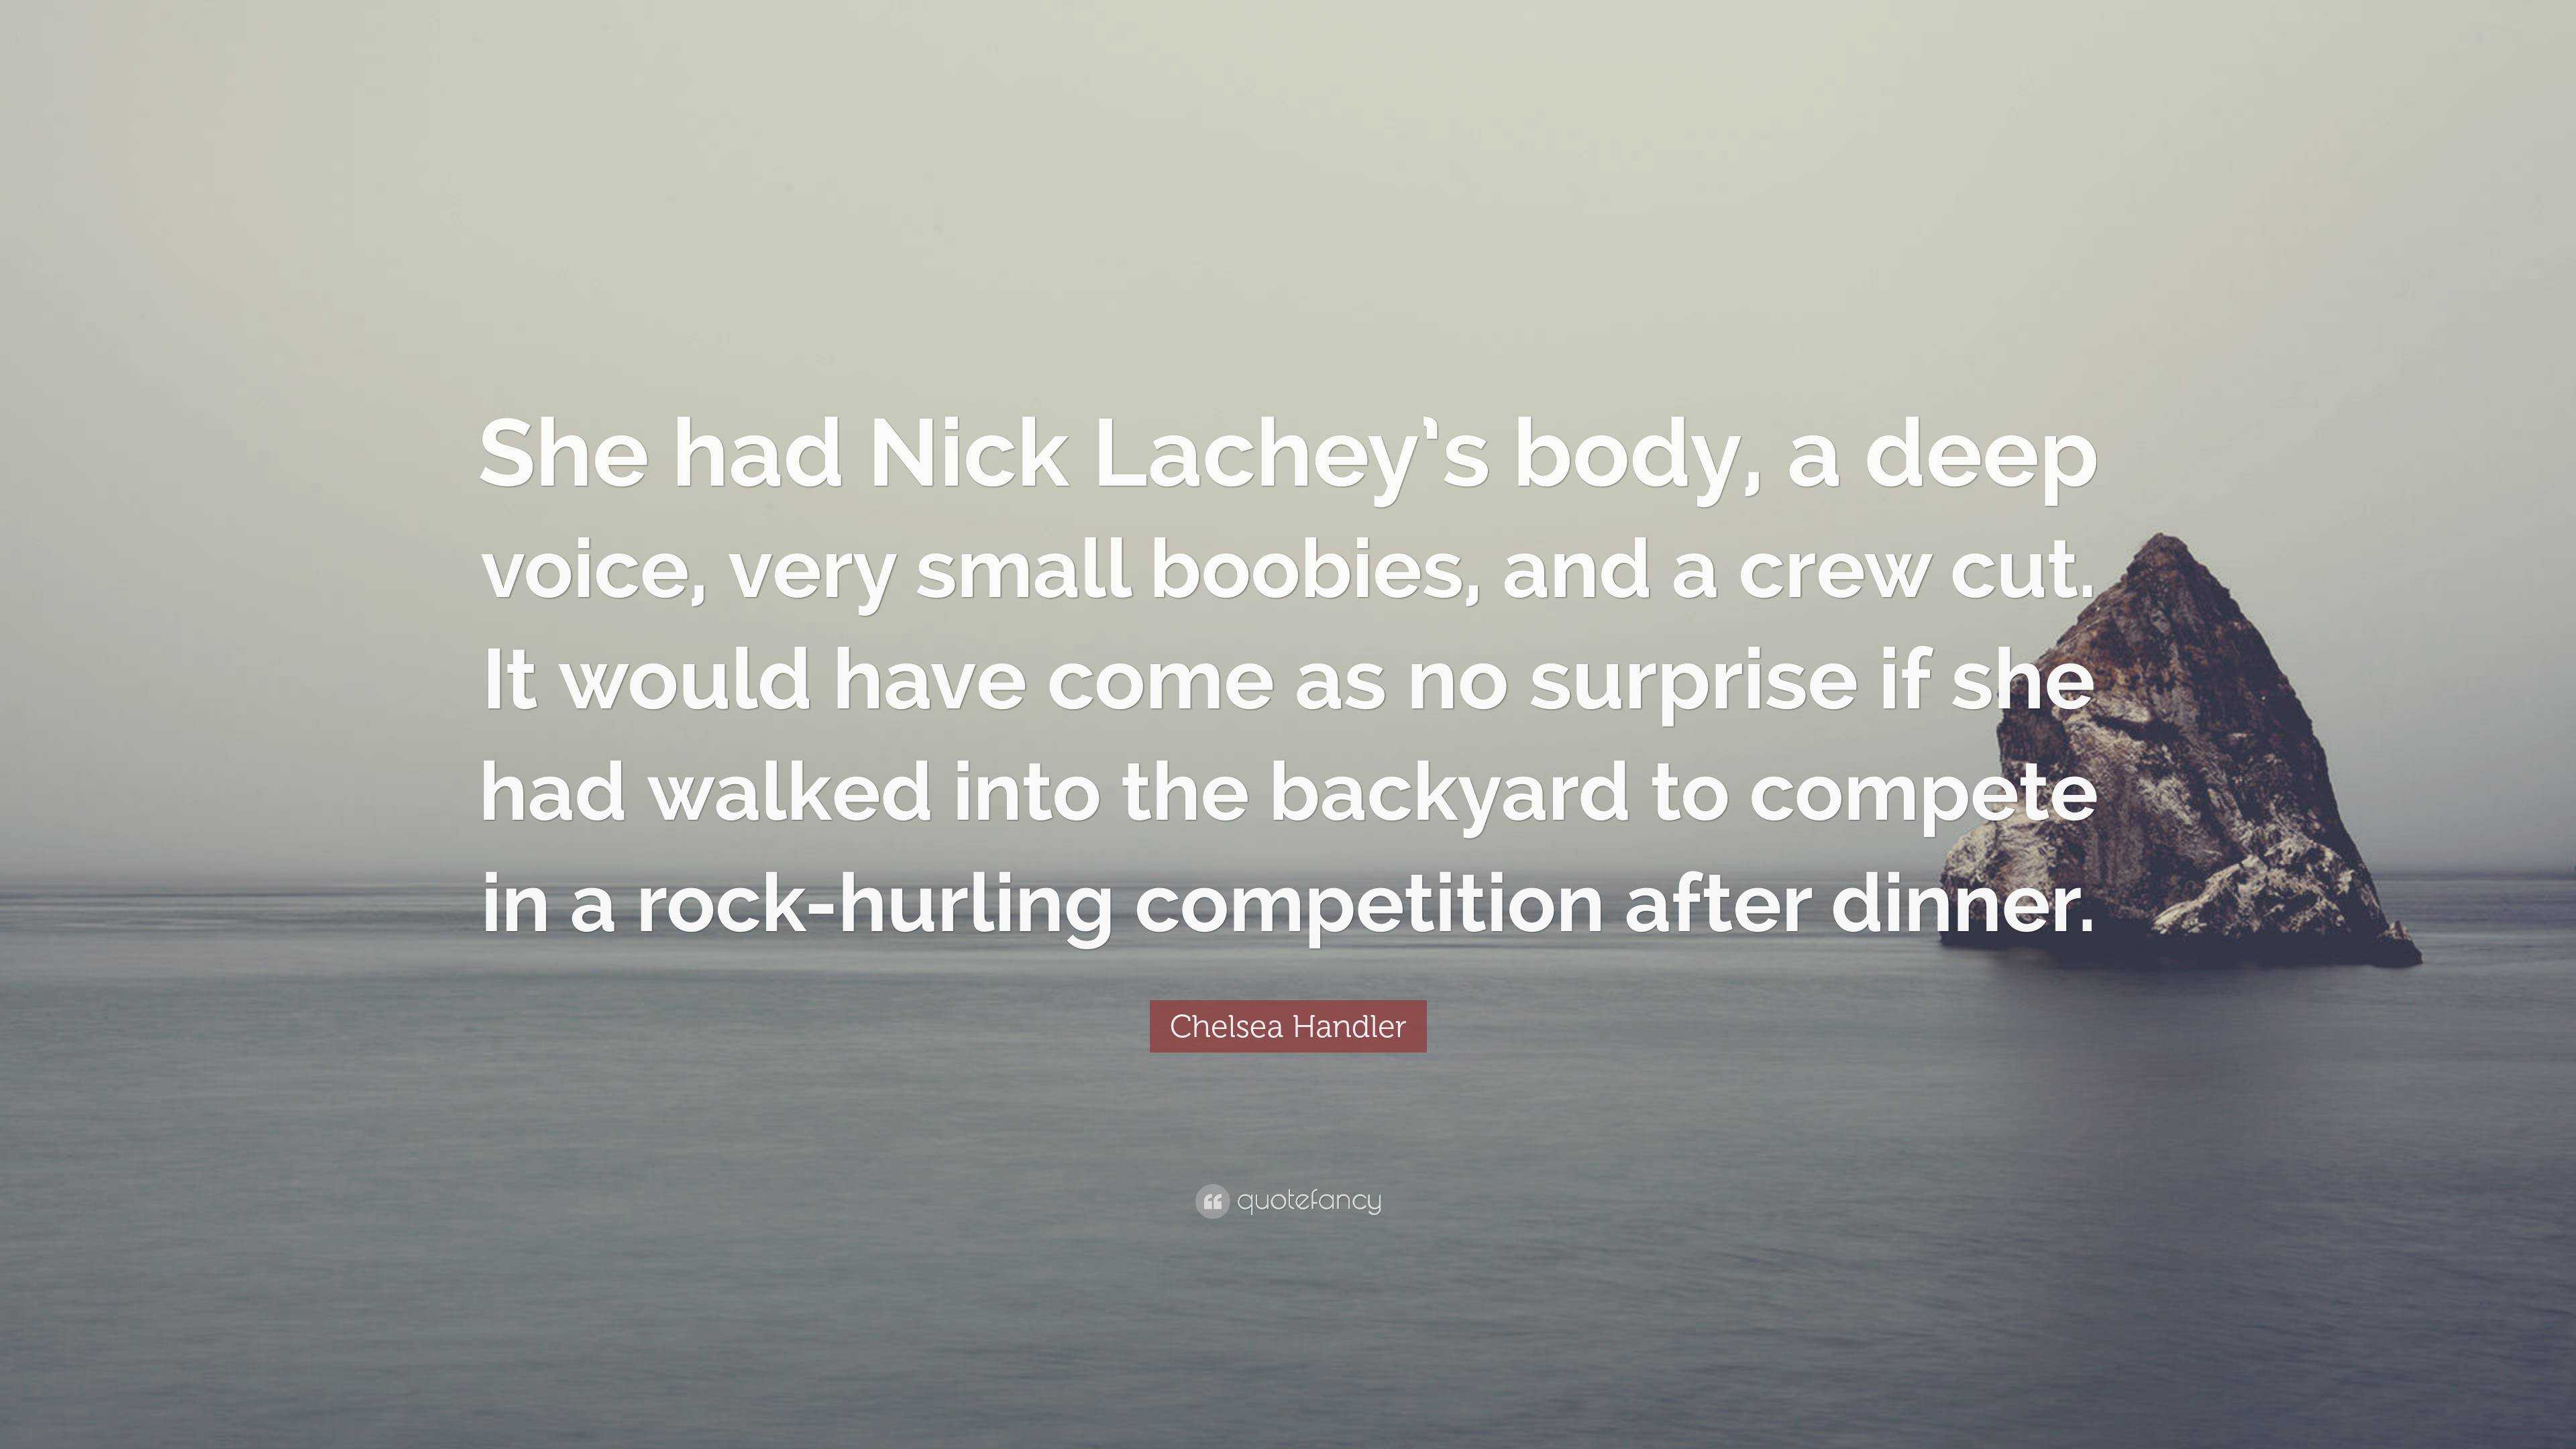 Chelsea Handler Quote: “She had Nick Lachey's body, a deep voice